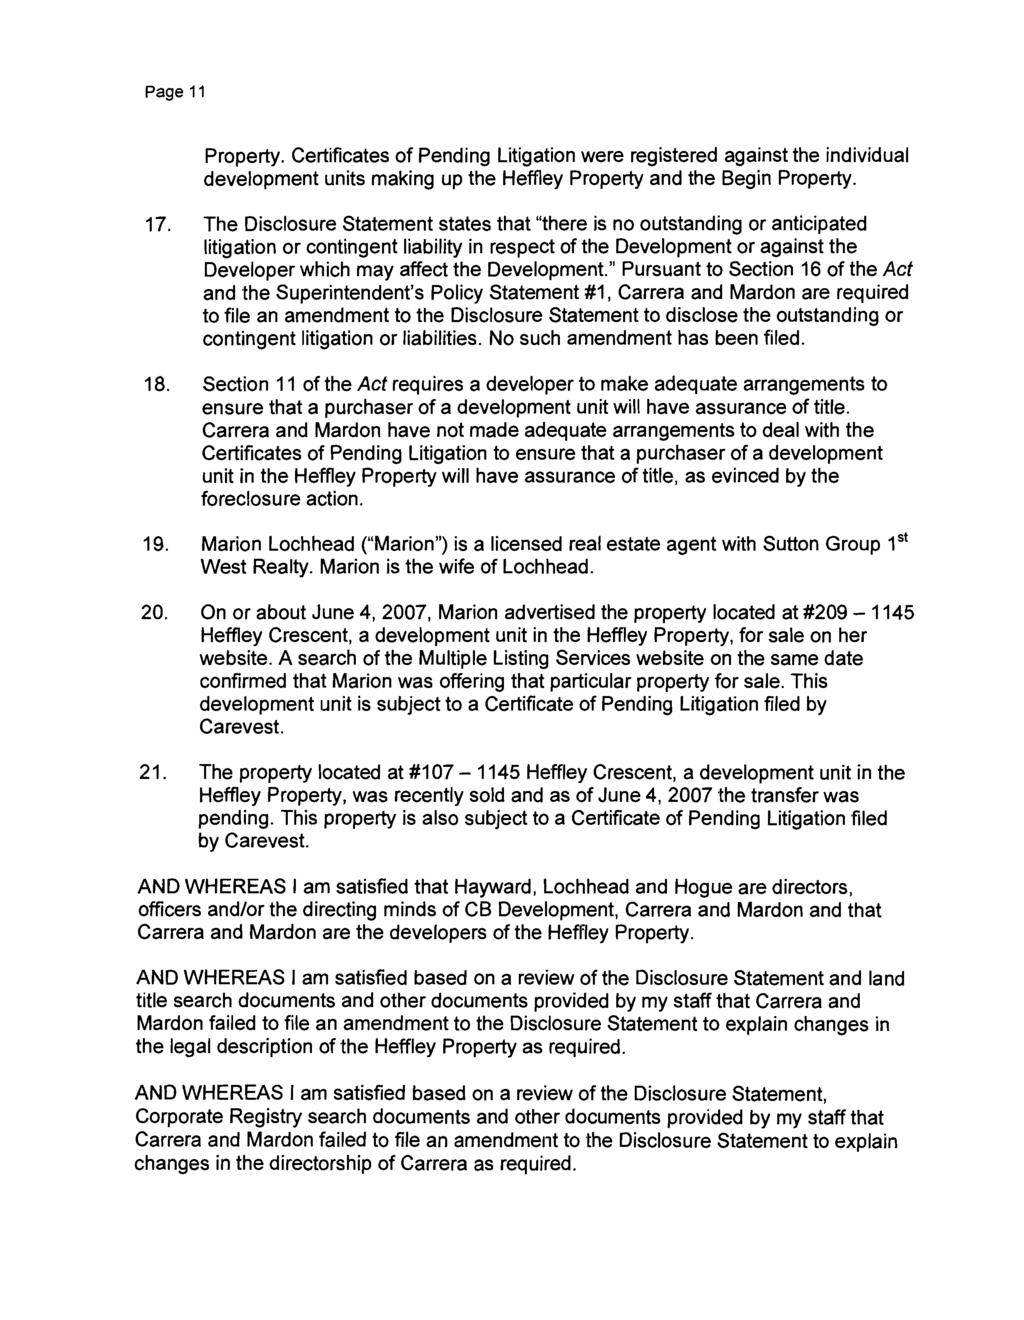 Page 11 Property. Certificates of Pending Litigation were registered against the individual development units making up the Hefl'ley Property and the Begin Property.